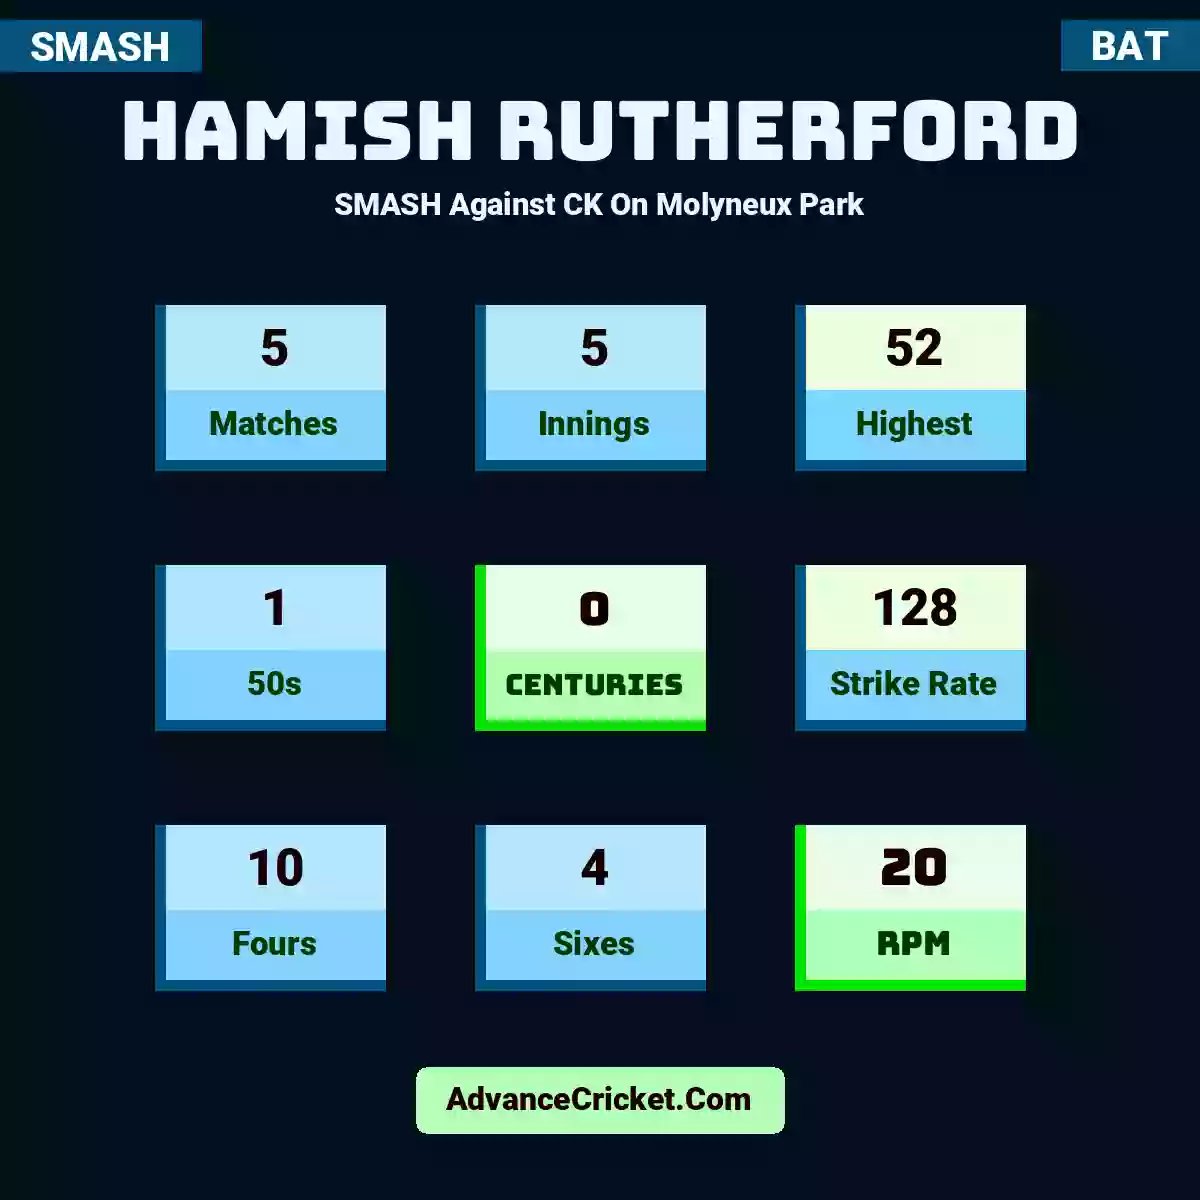 Hamish Rutherford SMASH  Against CK On Molyneux Park, Hamish Rutherford played 5 matches, scored 52 runs as highest, 1 half-centuries, and 0 centuries, with a strike rate of 128. H.Rutherford hit 10 fours and 4 sixes, with an RPM of 20.